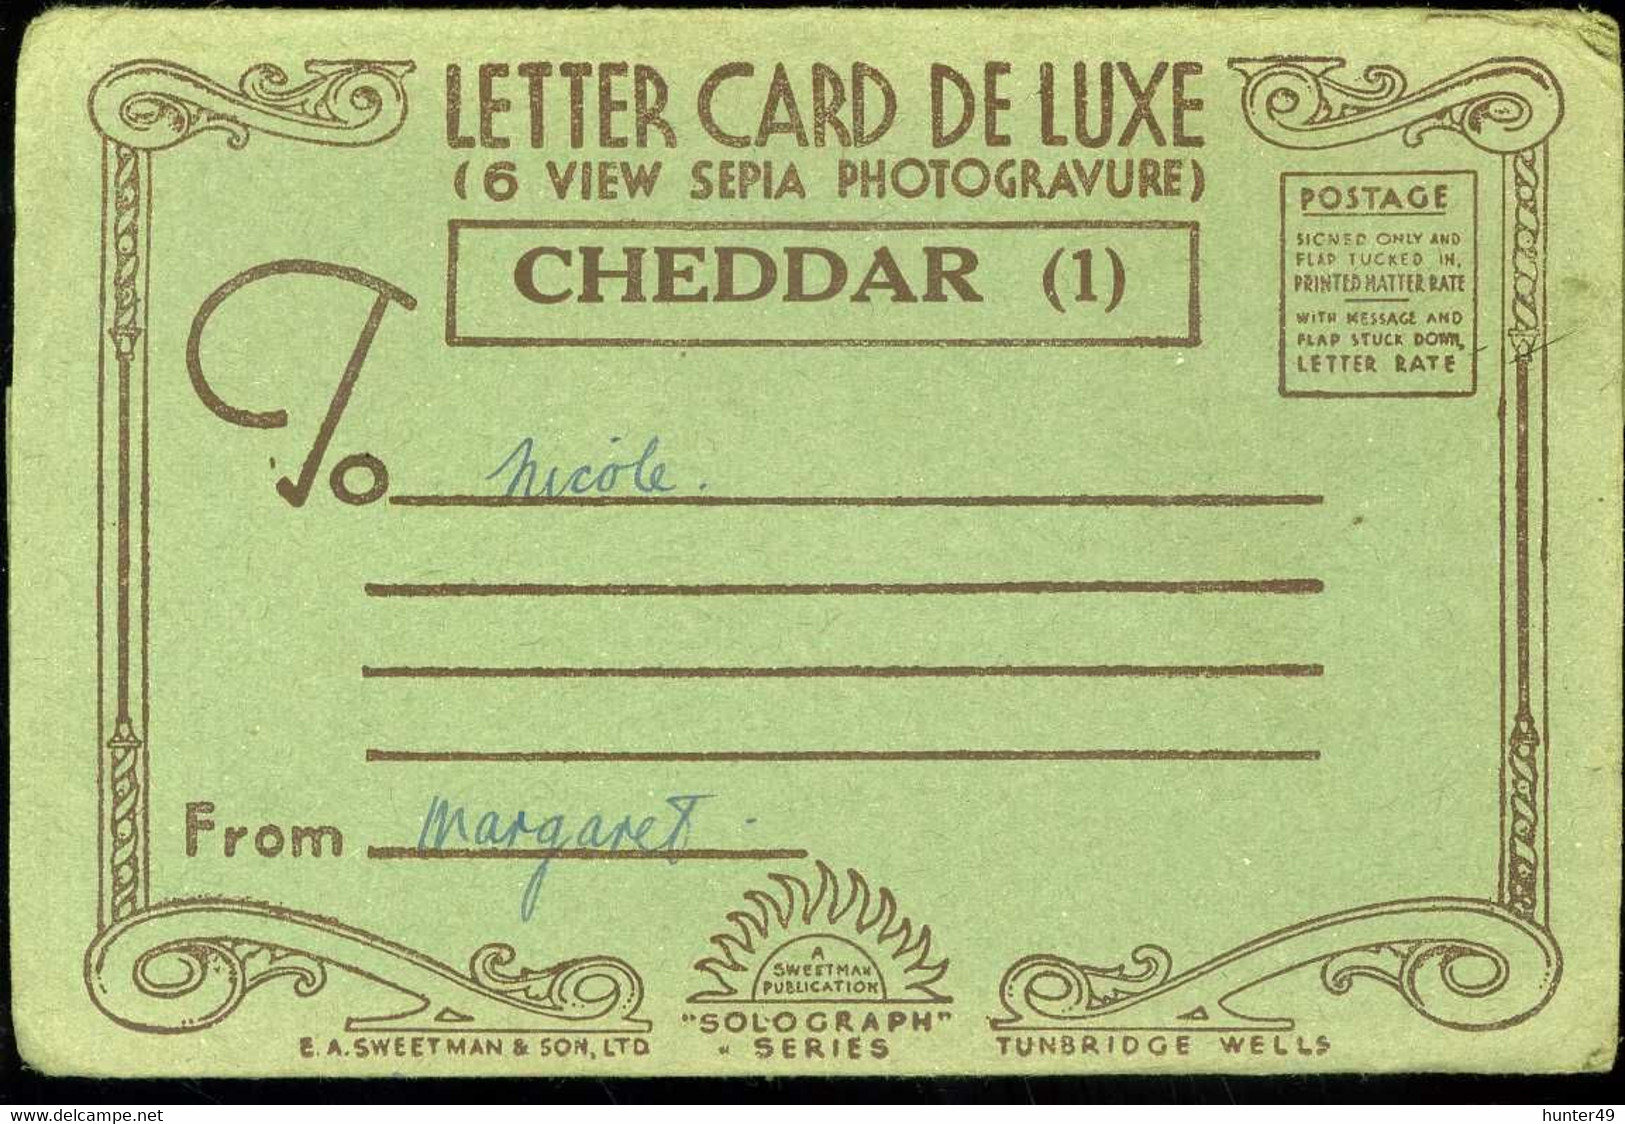 Cheddar Letter Card De Luxe 6 View Sepia Photogravure Sweetman Solograph - Cheddar